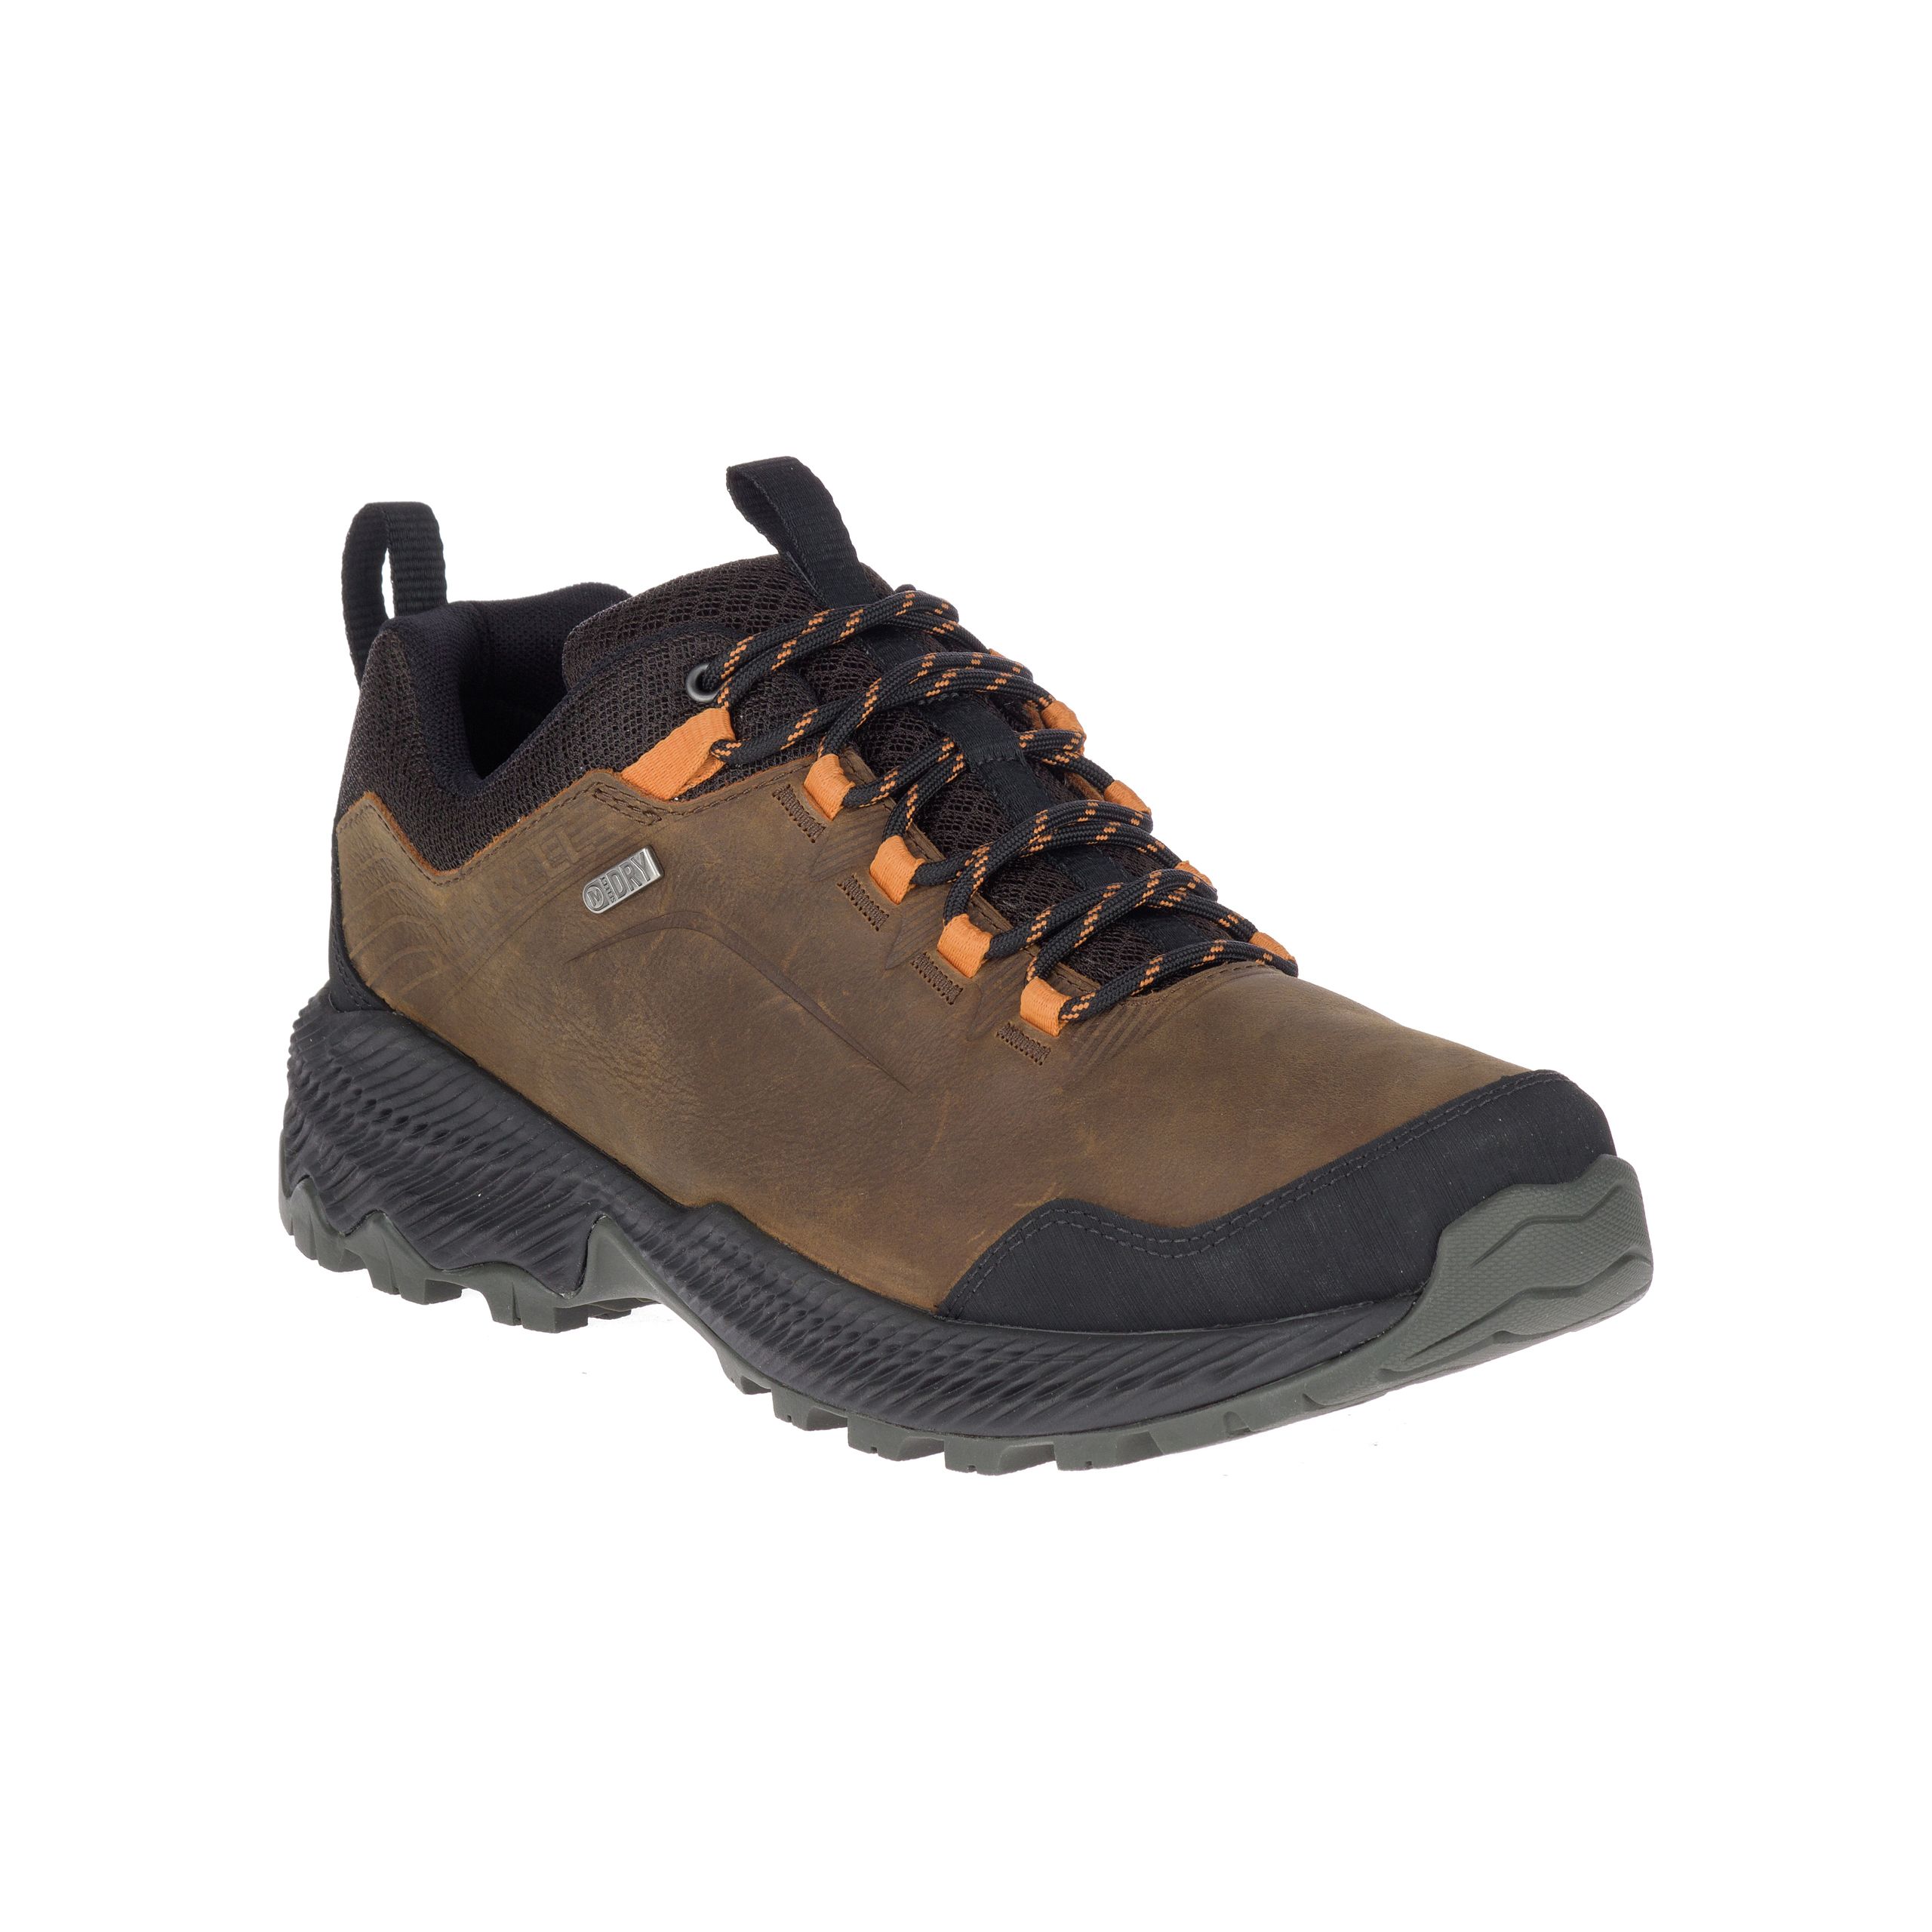 Merrell Mens Forestbound Waterproof Walking Shoes